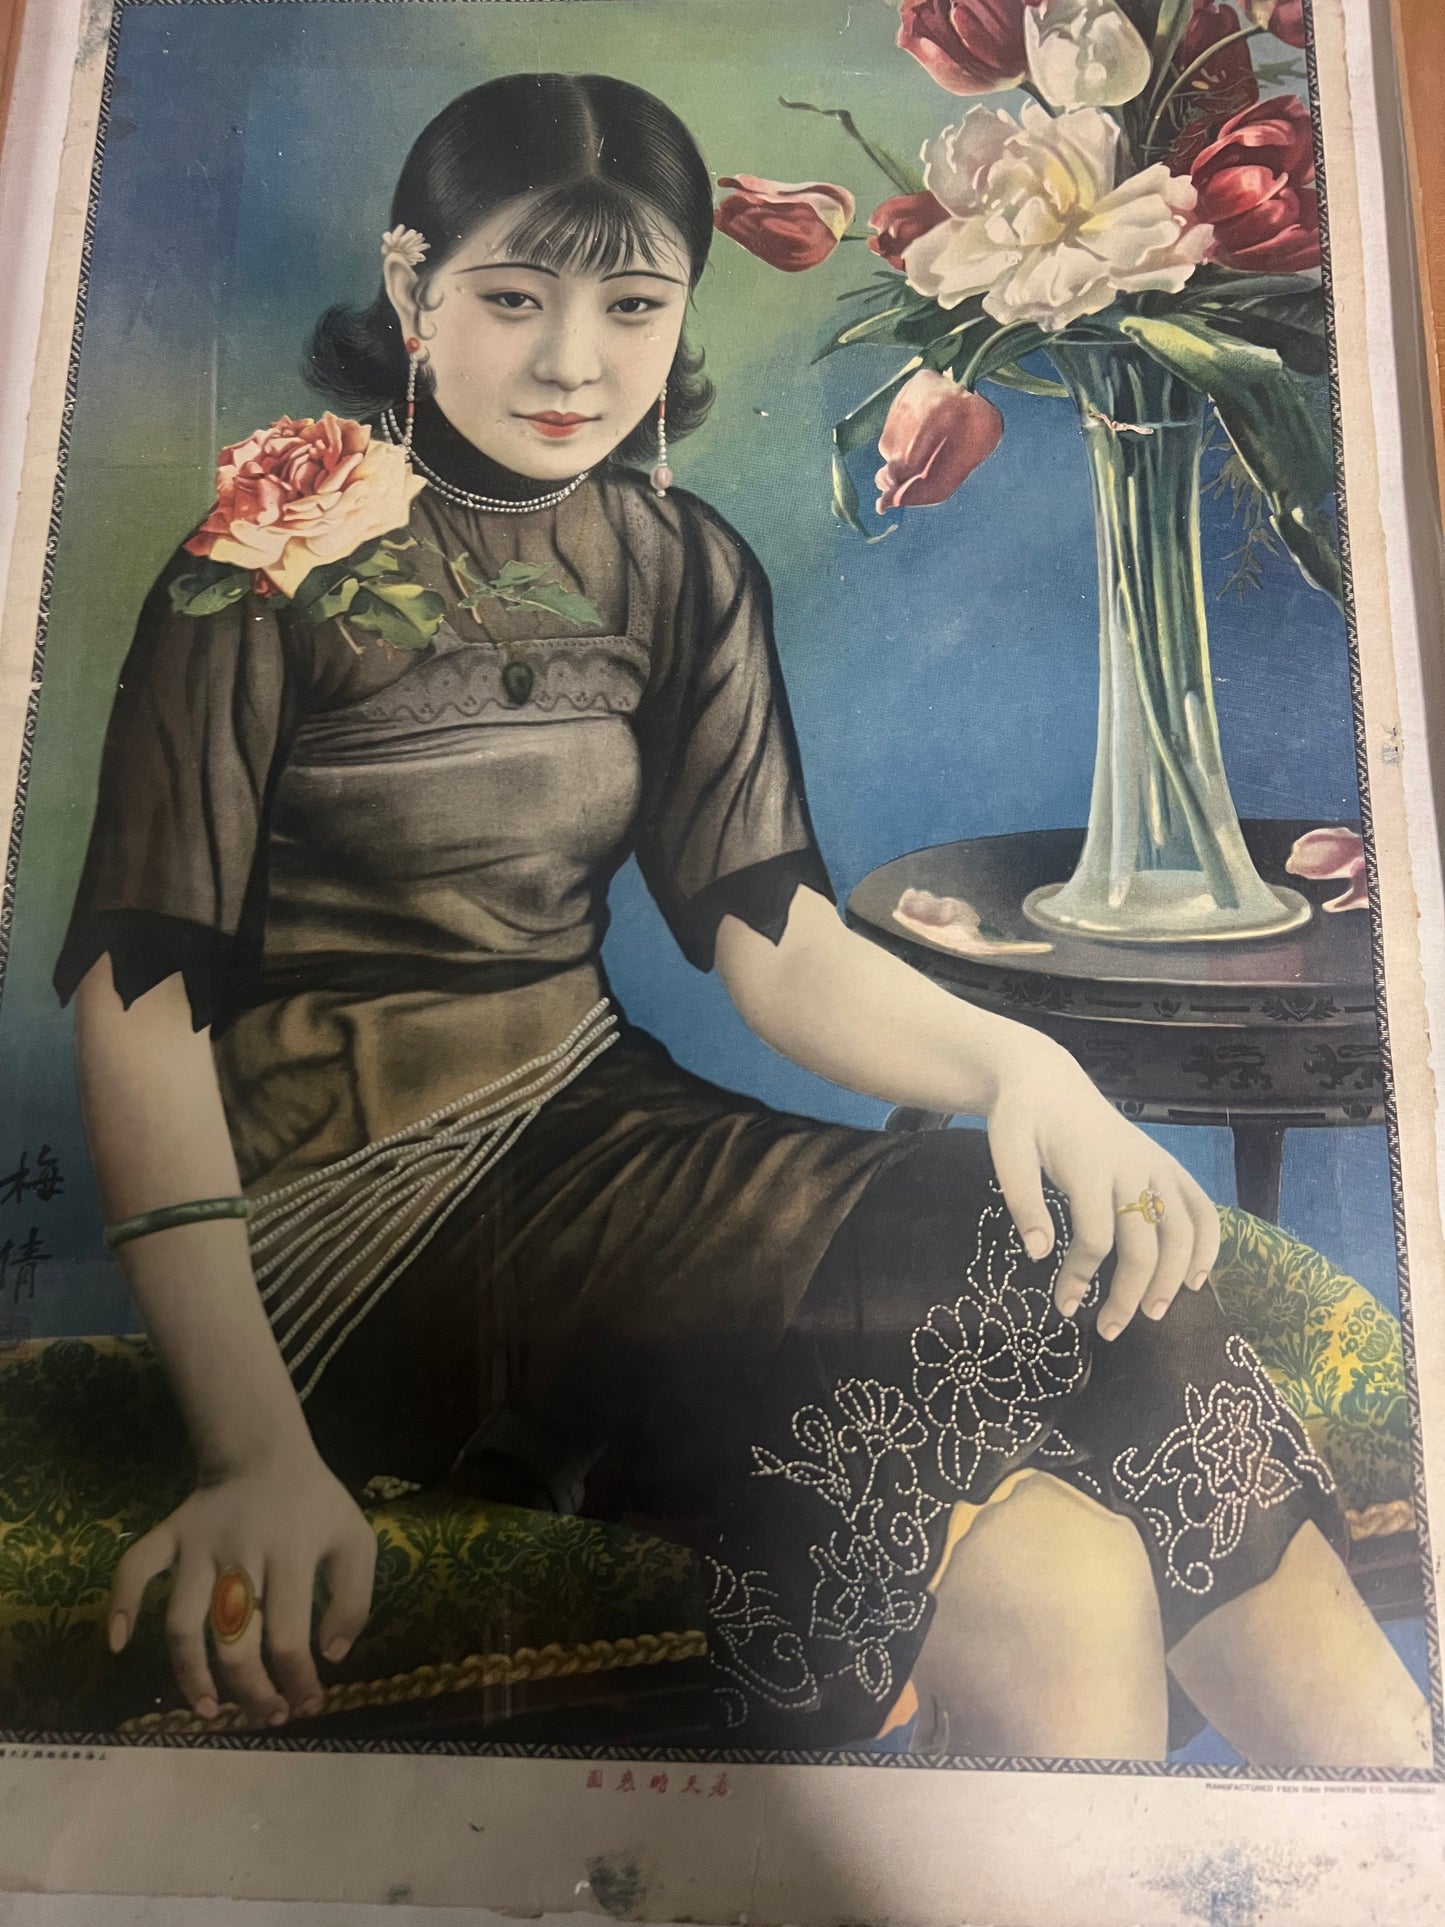 Antique 20th century Shang Hai China Jewelry advertising lithograph